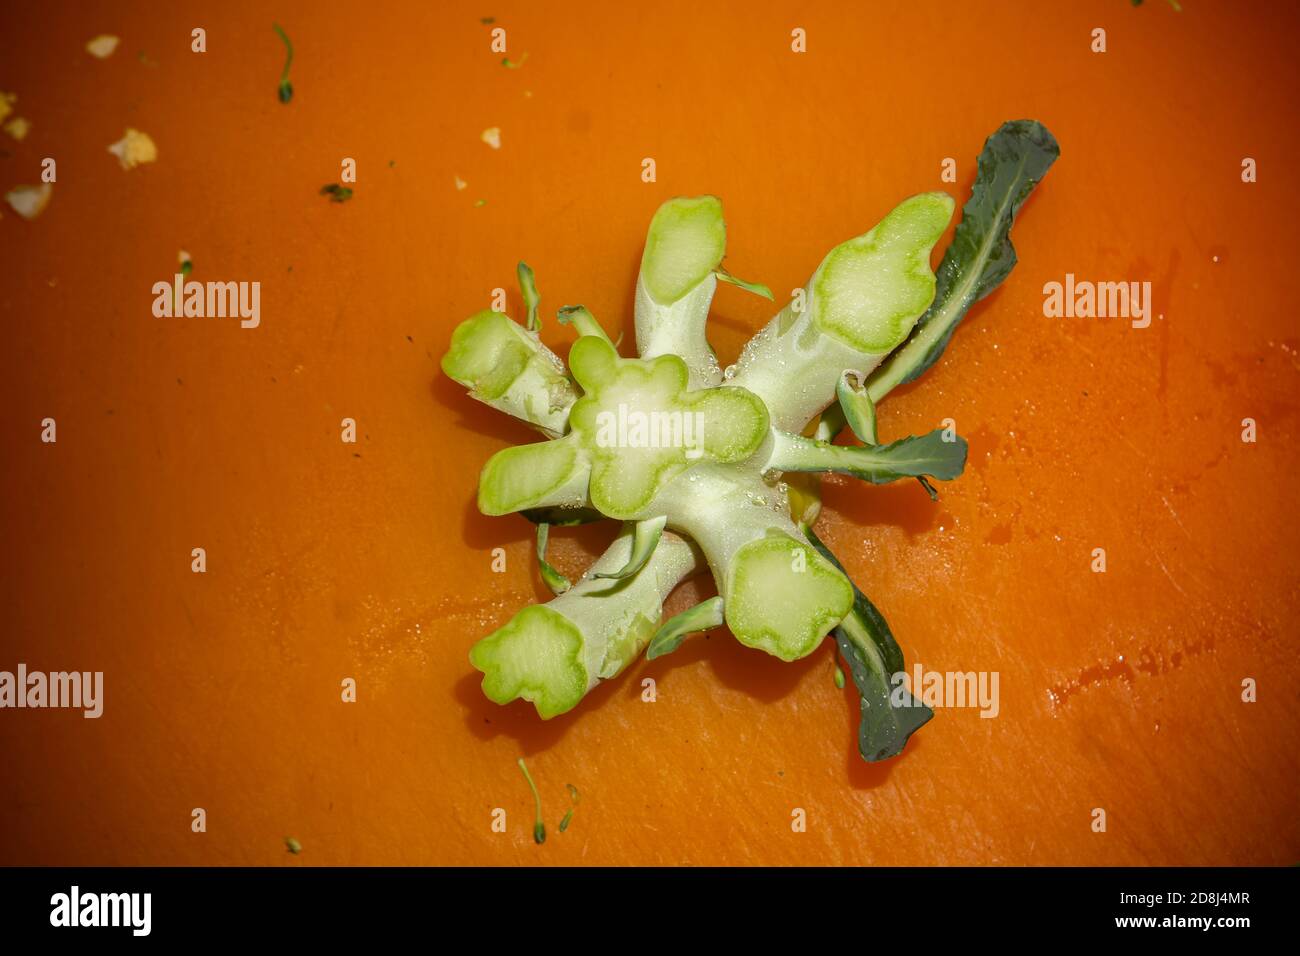 The end of a trimmed broccoli crown in New York on Thursday, October 22, 2020. (© Richard B. Levine) Stock Photo